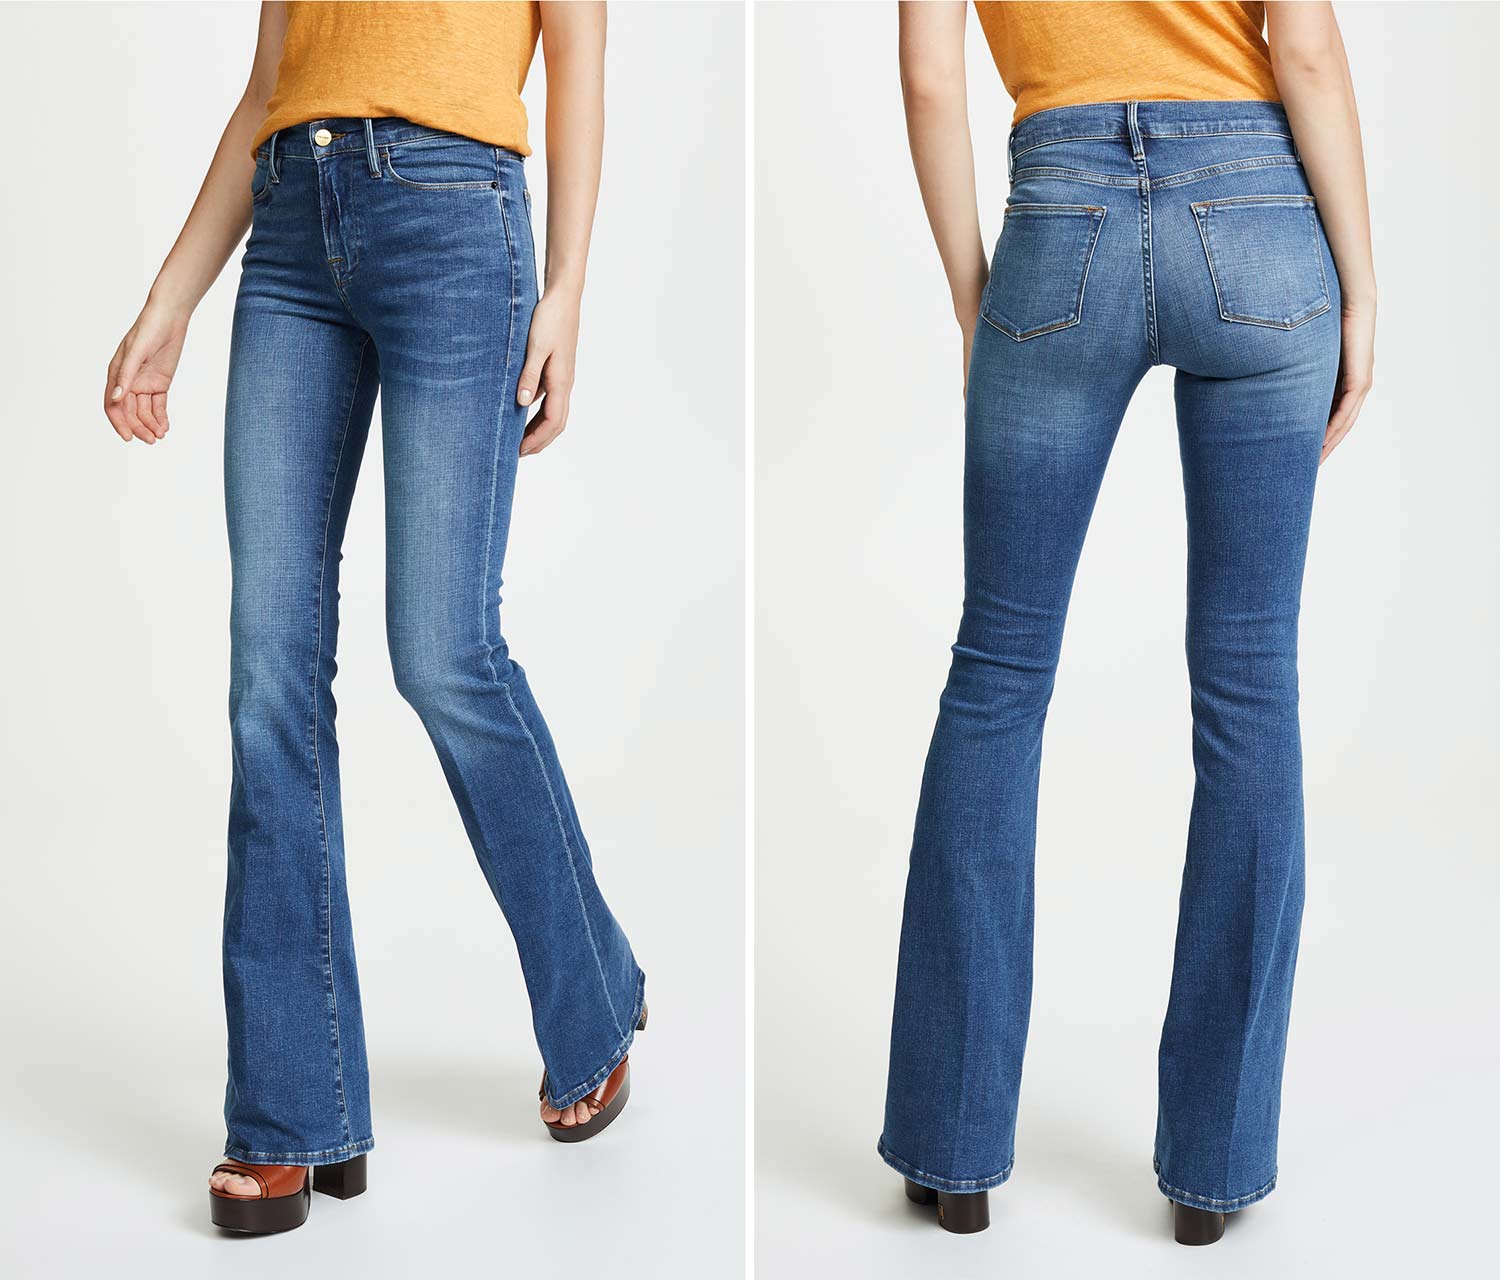 bell bottom (or bootcut) jeans over anything else